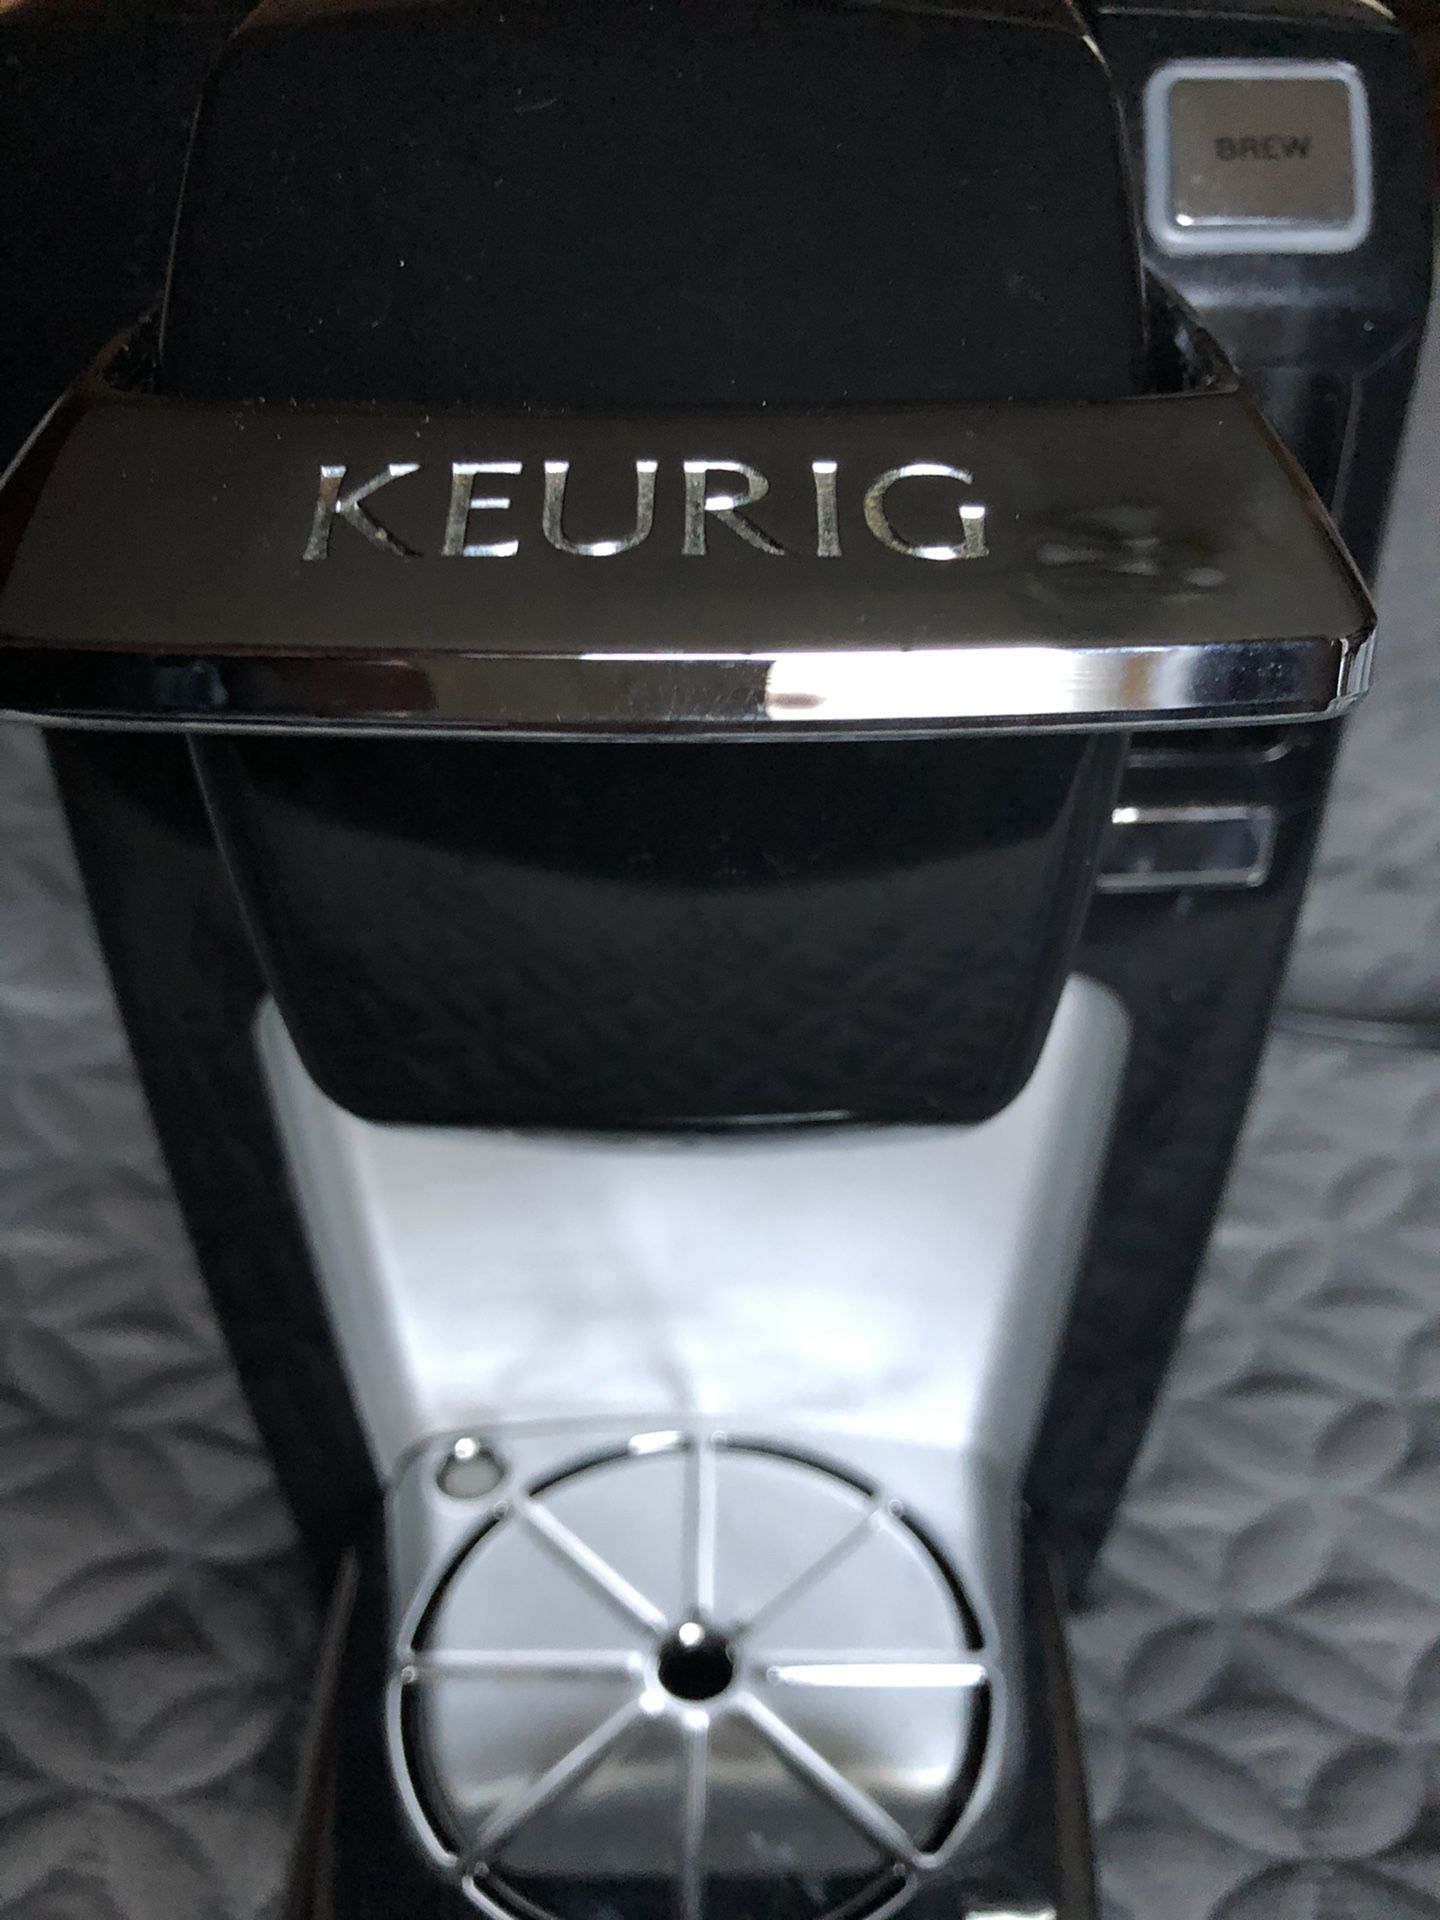 Keurig one cup coffee maker, excellent condition and works great.